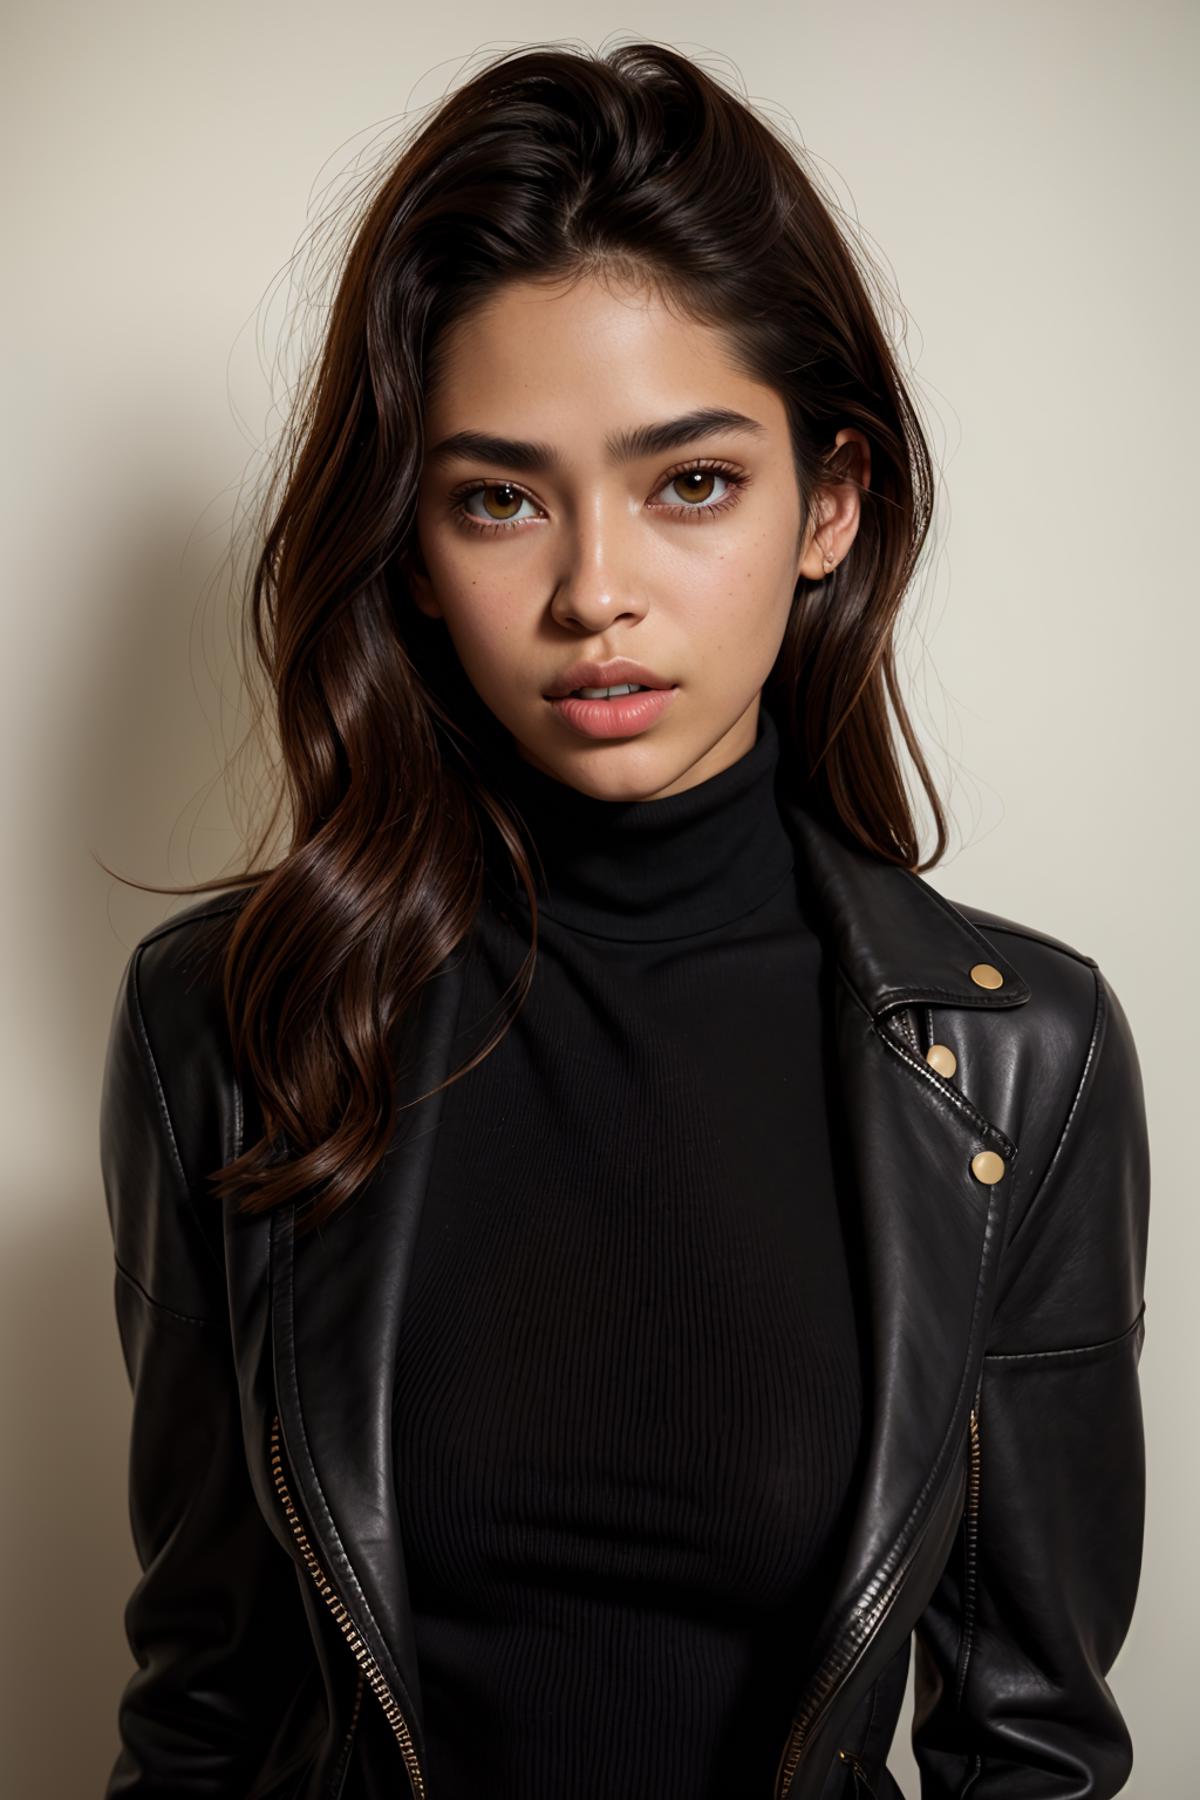 A woman with brown hair and light brown eyes wearing a black leather jacket and a black turtleneck.